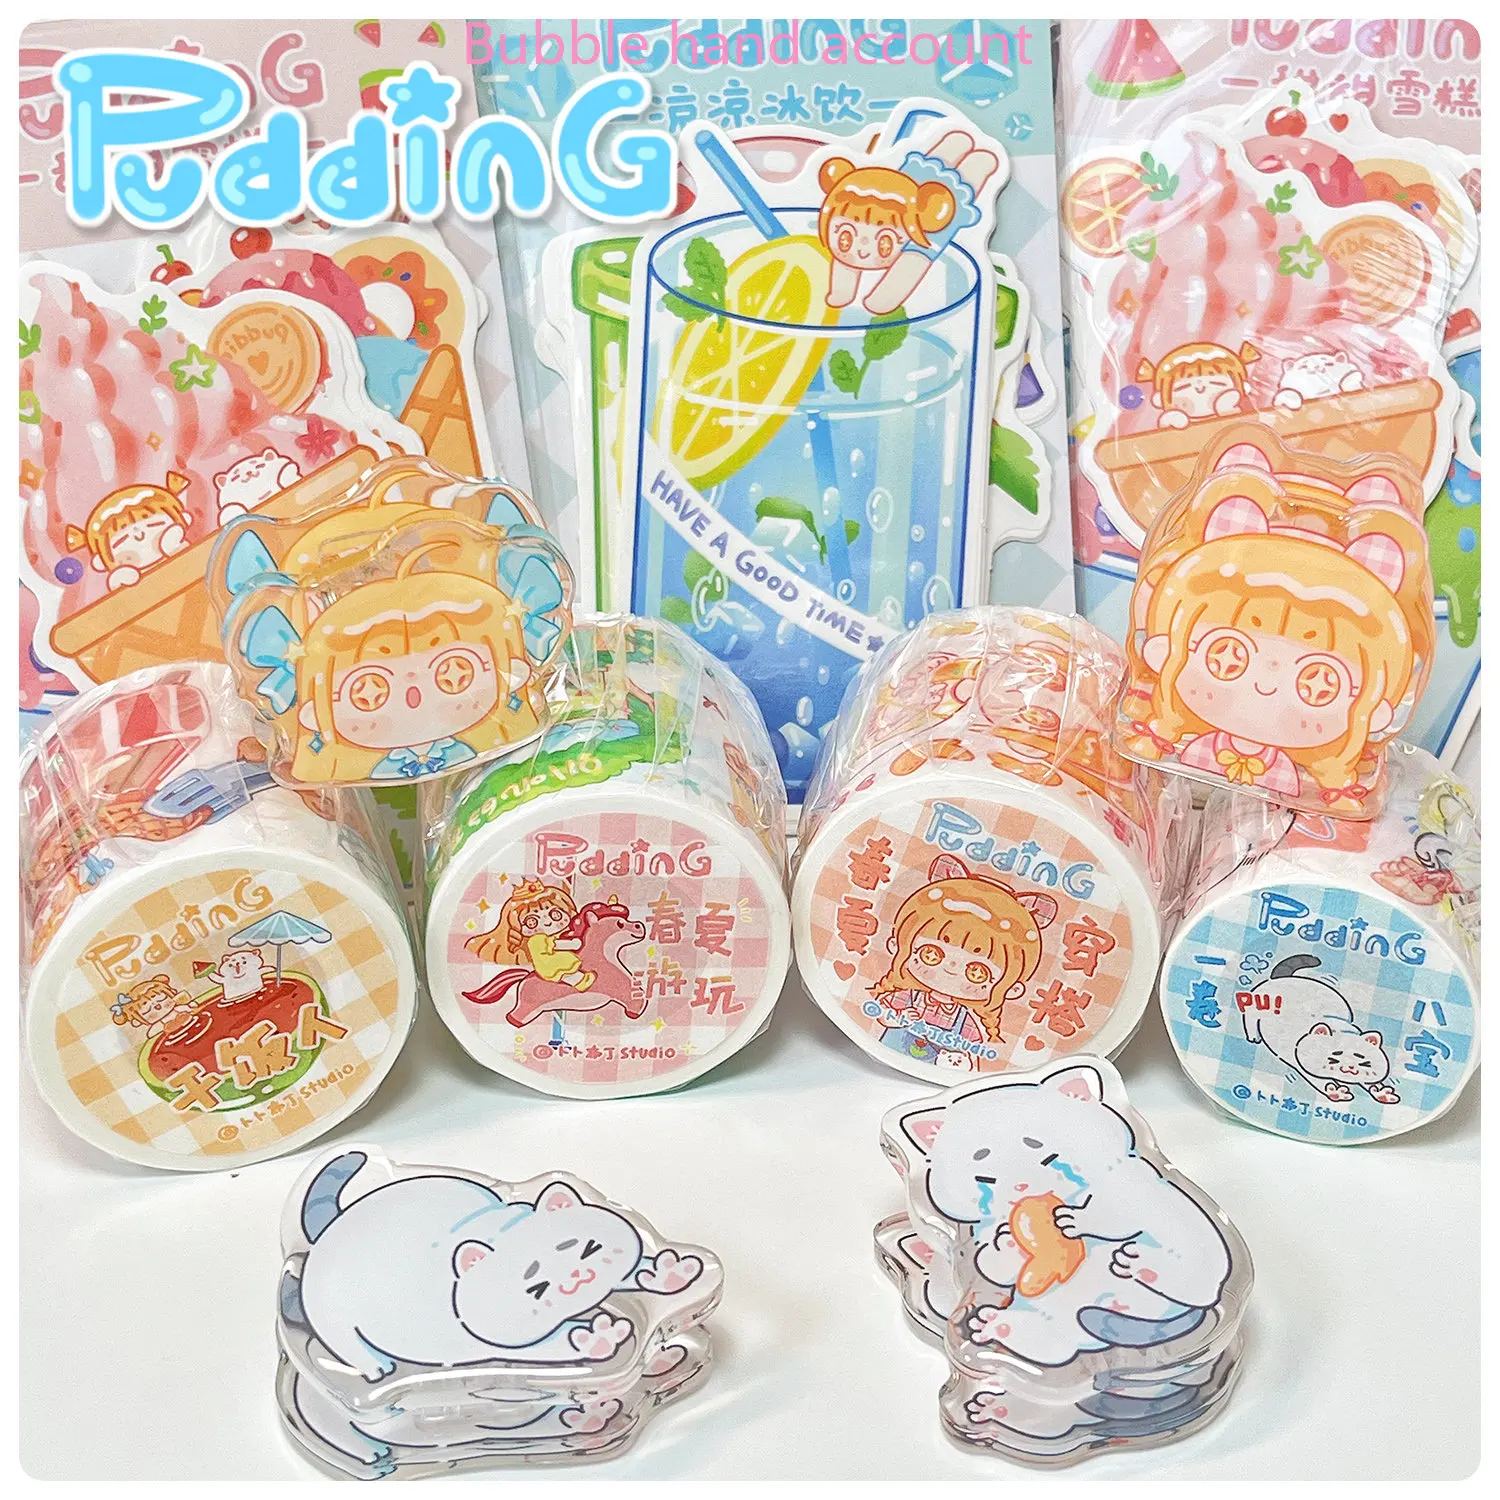 Pubu Pudding original and paper tape hand tent collage typography cute cartoon hand-painted stickers